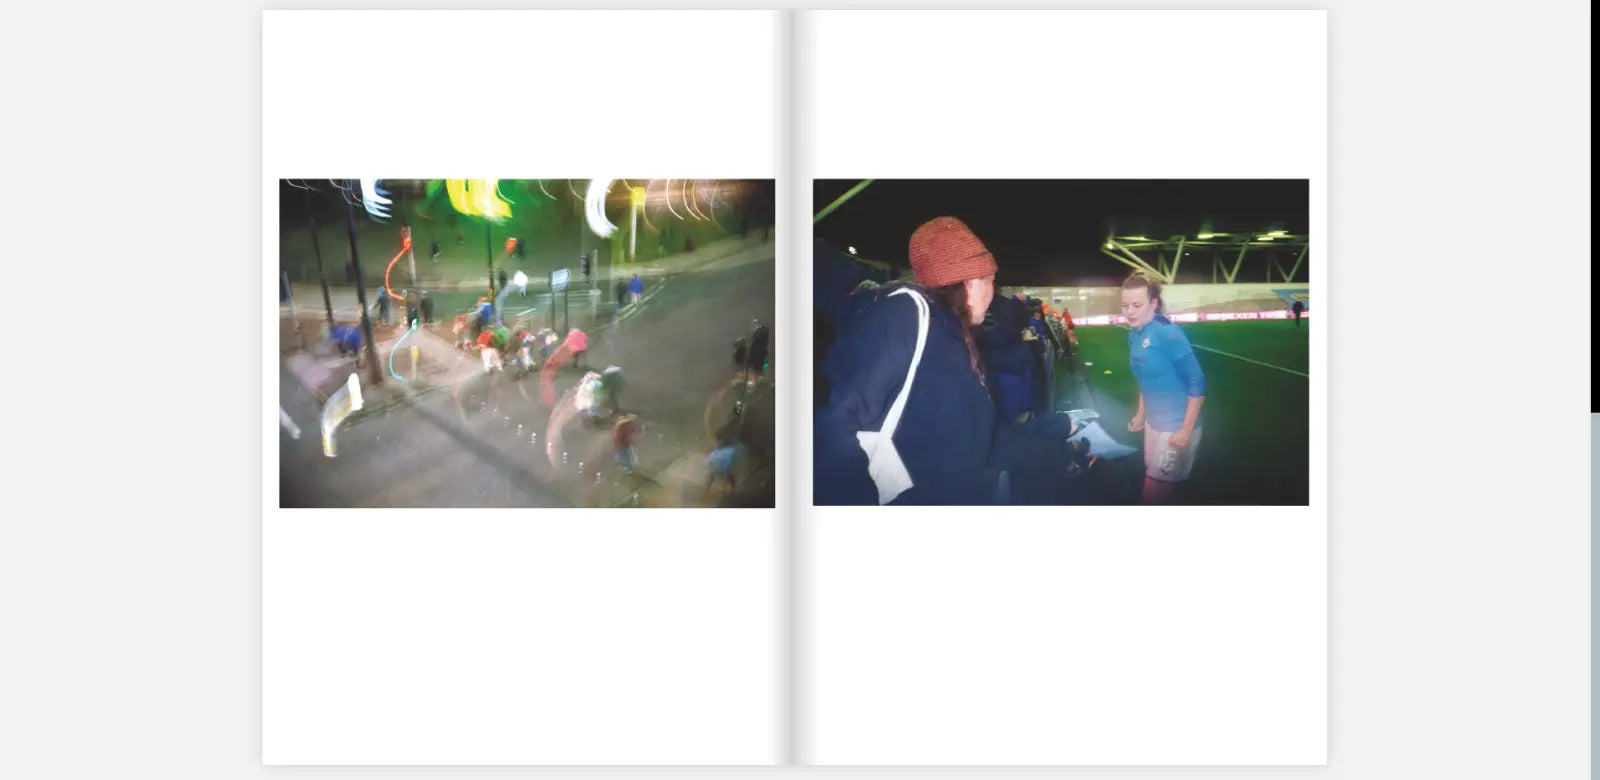 Two-page spread from the zine "The Women's Game" by Claire Wray. The left page shows a blurred, night-time street scene with people walking and colorful lights streaking through the image, creating a sense of motion. The right page features a football player in a blue jersey and white shorts, interacting with a fan wearing a red beanie hat. They are at the edge of a football field, with the stadium lights illuminating the scene in the background.